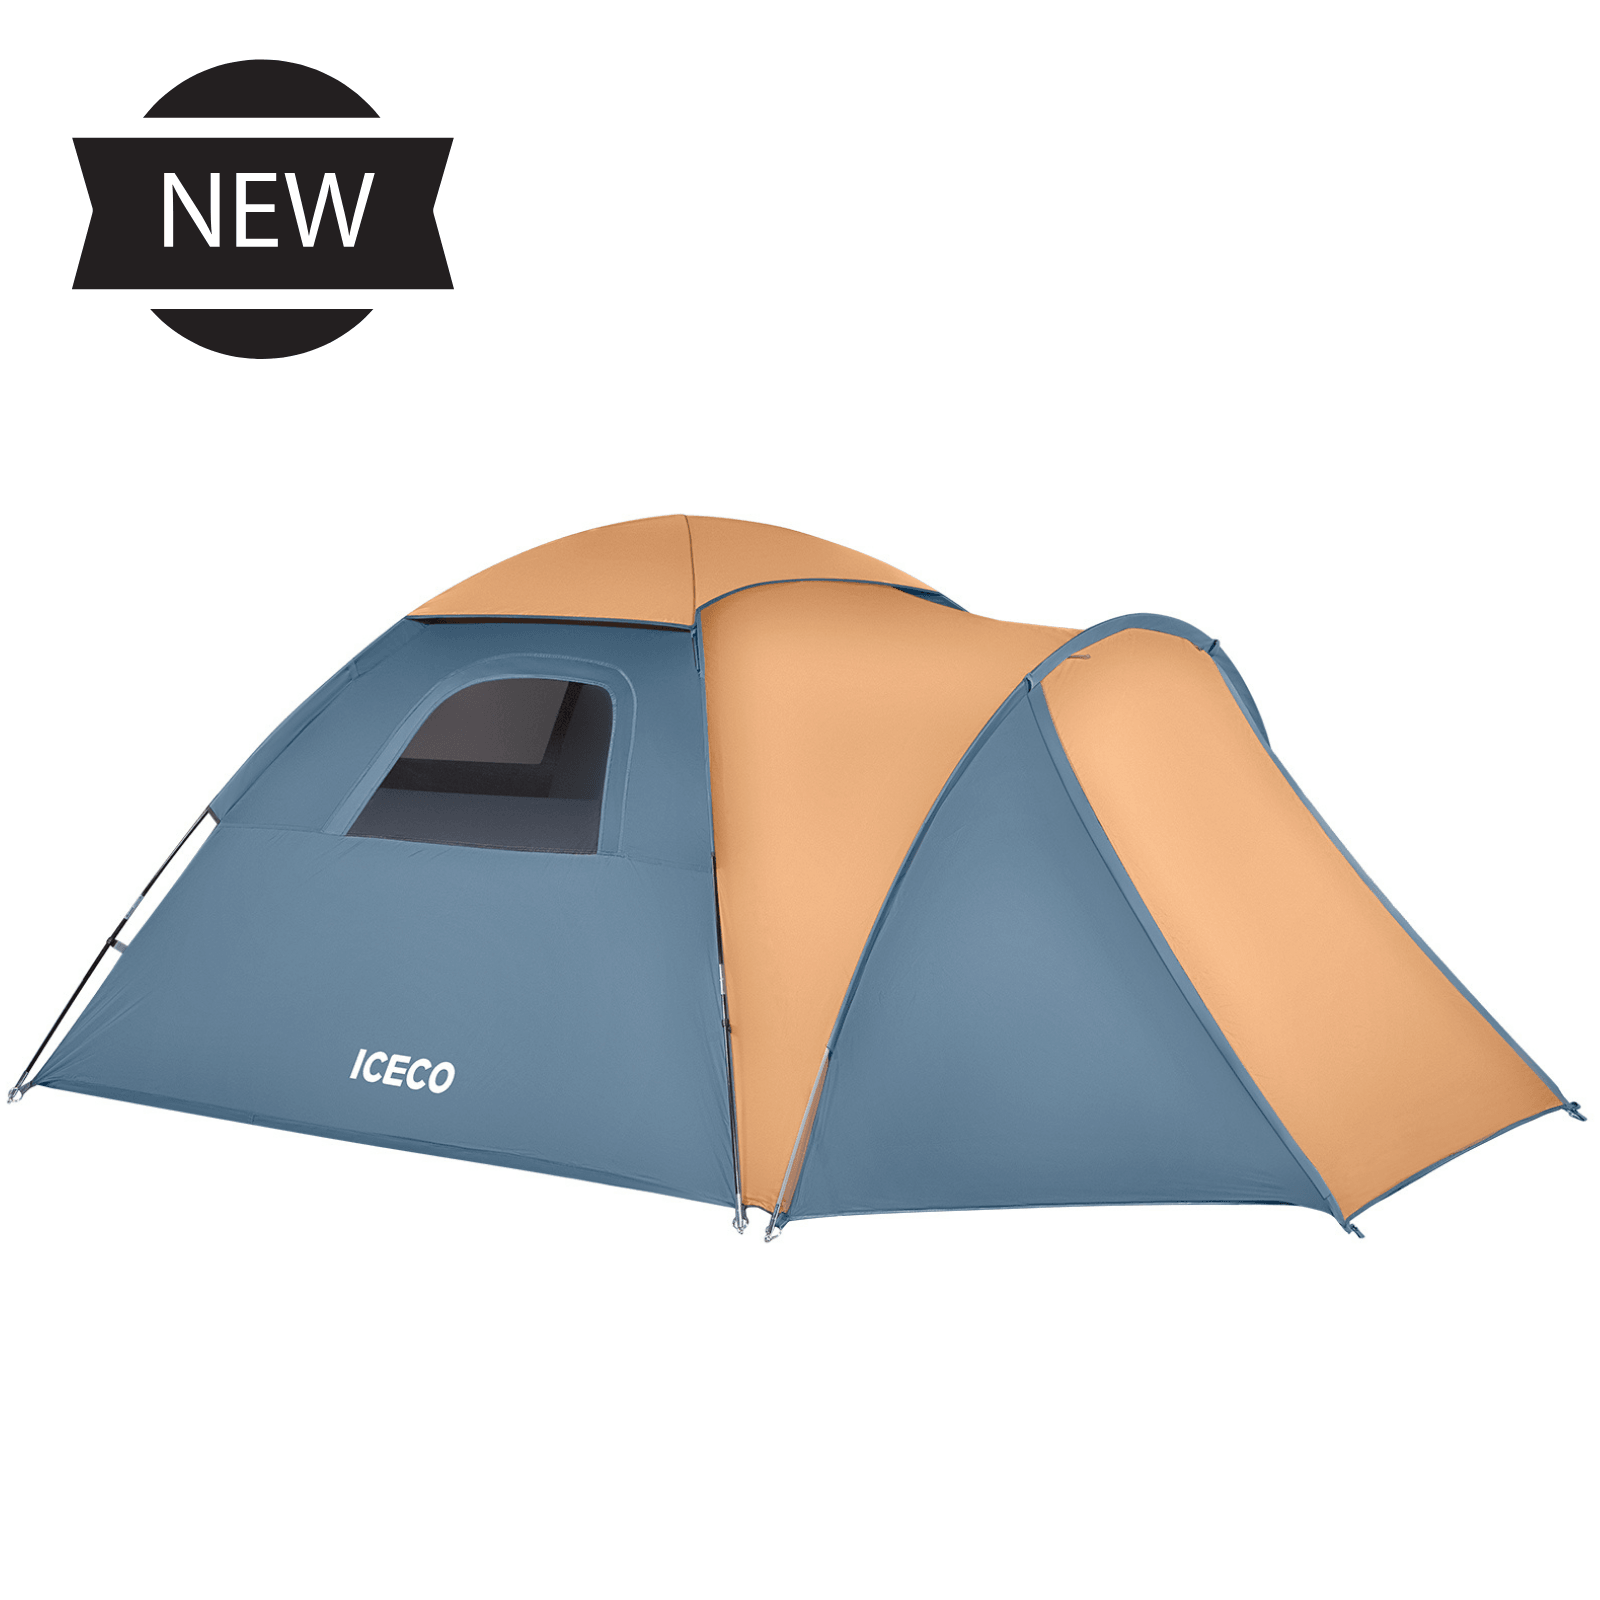 All Season 4 People Camping Tent | ICECO, Green Tent with UV Protection